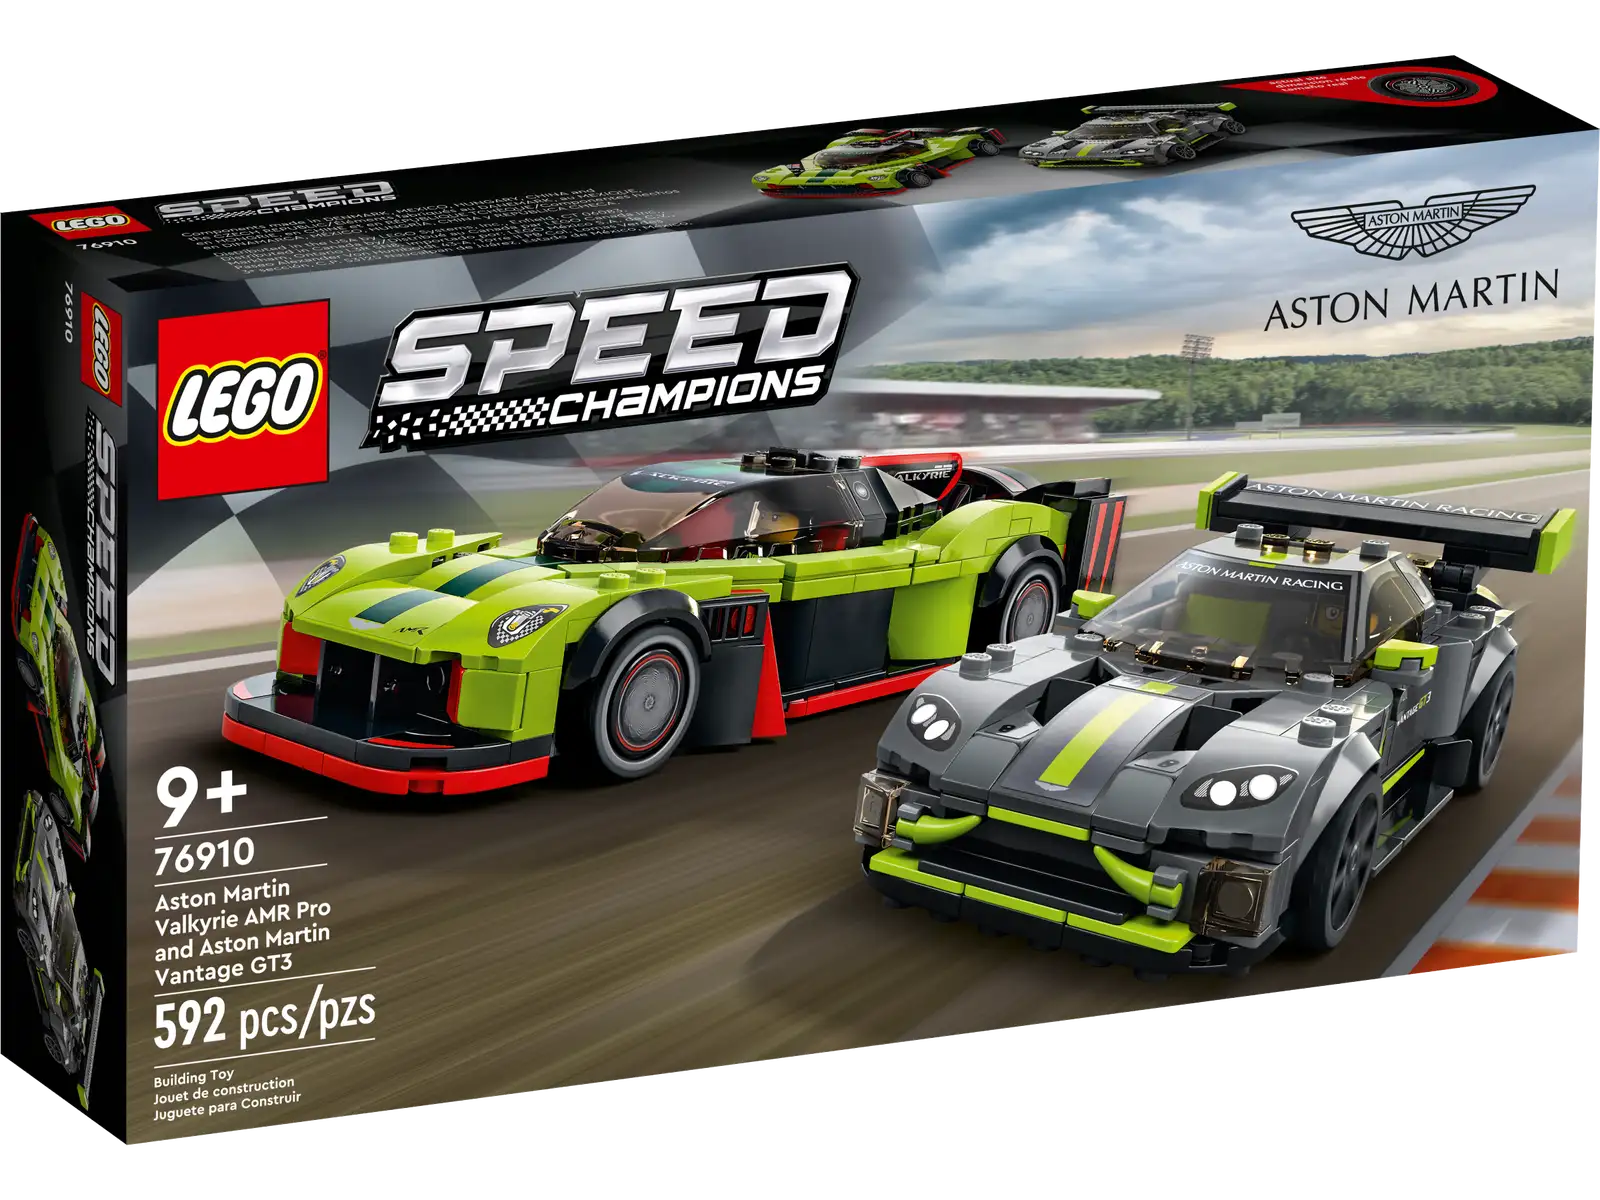 Here’s a winning combination for fans of superfast cars – the LEGO® Speed Champions Aston Martin Valkyrie AMR Pro and Aston Martin Vantage GT3 (76910) toy building set. Now available to collect, construct and explore, these accurately detailed LEGO models deliver a rewarding building experience, are great for display and awesome to race! Digital building instructions This Speed Champions set comes with printed and digital building instructions. Available in the free LEGO Building Instructions app for smartphones and tablets, the interactive digital guide comes with amazing zoom and rotate tools that allow you to visualize a model from all angles as you build. Celebrating innovative design LEGO Speed Champions sets deliver buildable versions of the world’s most popular and innovative vehicles. The fun-to-build, collectible models are great for display and imaginative racetrack drama, making them a great gift choice for kids and automobile enthusiasts of all ages. LEGO® recreations of the Aston Martin Valkyrie AMR Pro and Aston Martin Vantage GT3 – A playset for kids and car enthusiasts with a passion for race cars and vehicle innovation What’s in the box? – Everything you need to recreate the Aston Martin Valkyrie AMR Pro and Vantage GT3 in LEGO® bricks, plus 2 driver minifigures, each with a racing suit, helmet, wig and a wrench Collect, play and display – These collectible toy cars are designed for display and imaginative racetrack role play A gift for any occasion – The 592-piece LEGO® Speed Champions Aston Martin Valkyrie AMR Pro & Aston Martin Vantage GT3 (76910) can be given as a birthday or anytime gift for kids and car fans aged 9+ Easy to carry and store – The Aston Martin Valkyrie AMR Pro measures over 1.5 in. (4cm) high, 7 in. (18cm) long and 3 in. (7cm) wide No batteries required – The cars in this playset are powered by kids’ imaginations, so the racing action never stops! Interactive digital building guide – Zoom, rotate and view each model from all angles as you build with the LEGO® Building Instructions app, available for smartphones and tablets Putting innovation in the driving seat – LEGO® Speed Champions building sets give kids and car enthusiasts the chance to explore the innovation of vehicle design A focus on quality – LEGO® components meet strict industry standards to ensure they’re consistent, compatible and fun to build with Tested for safety – All LEGO® building toys are carefully tested to ensure every playset meets strict safety standards